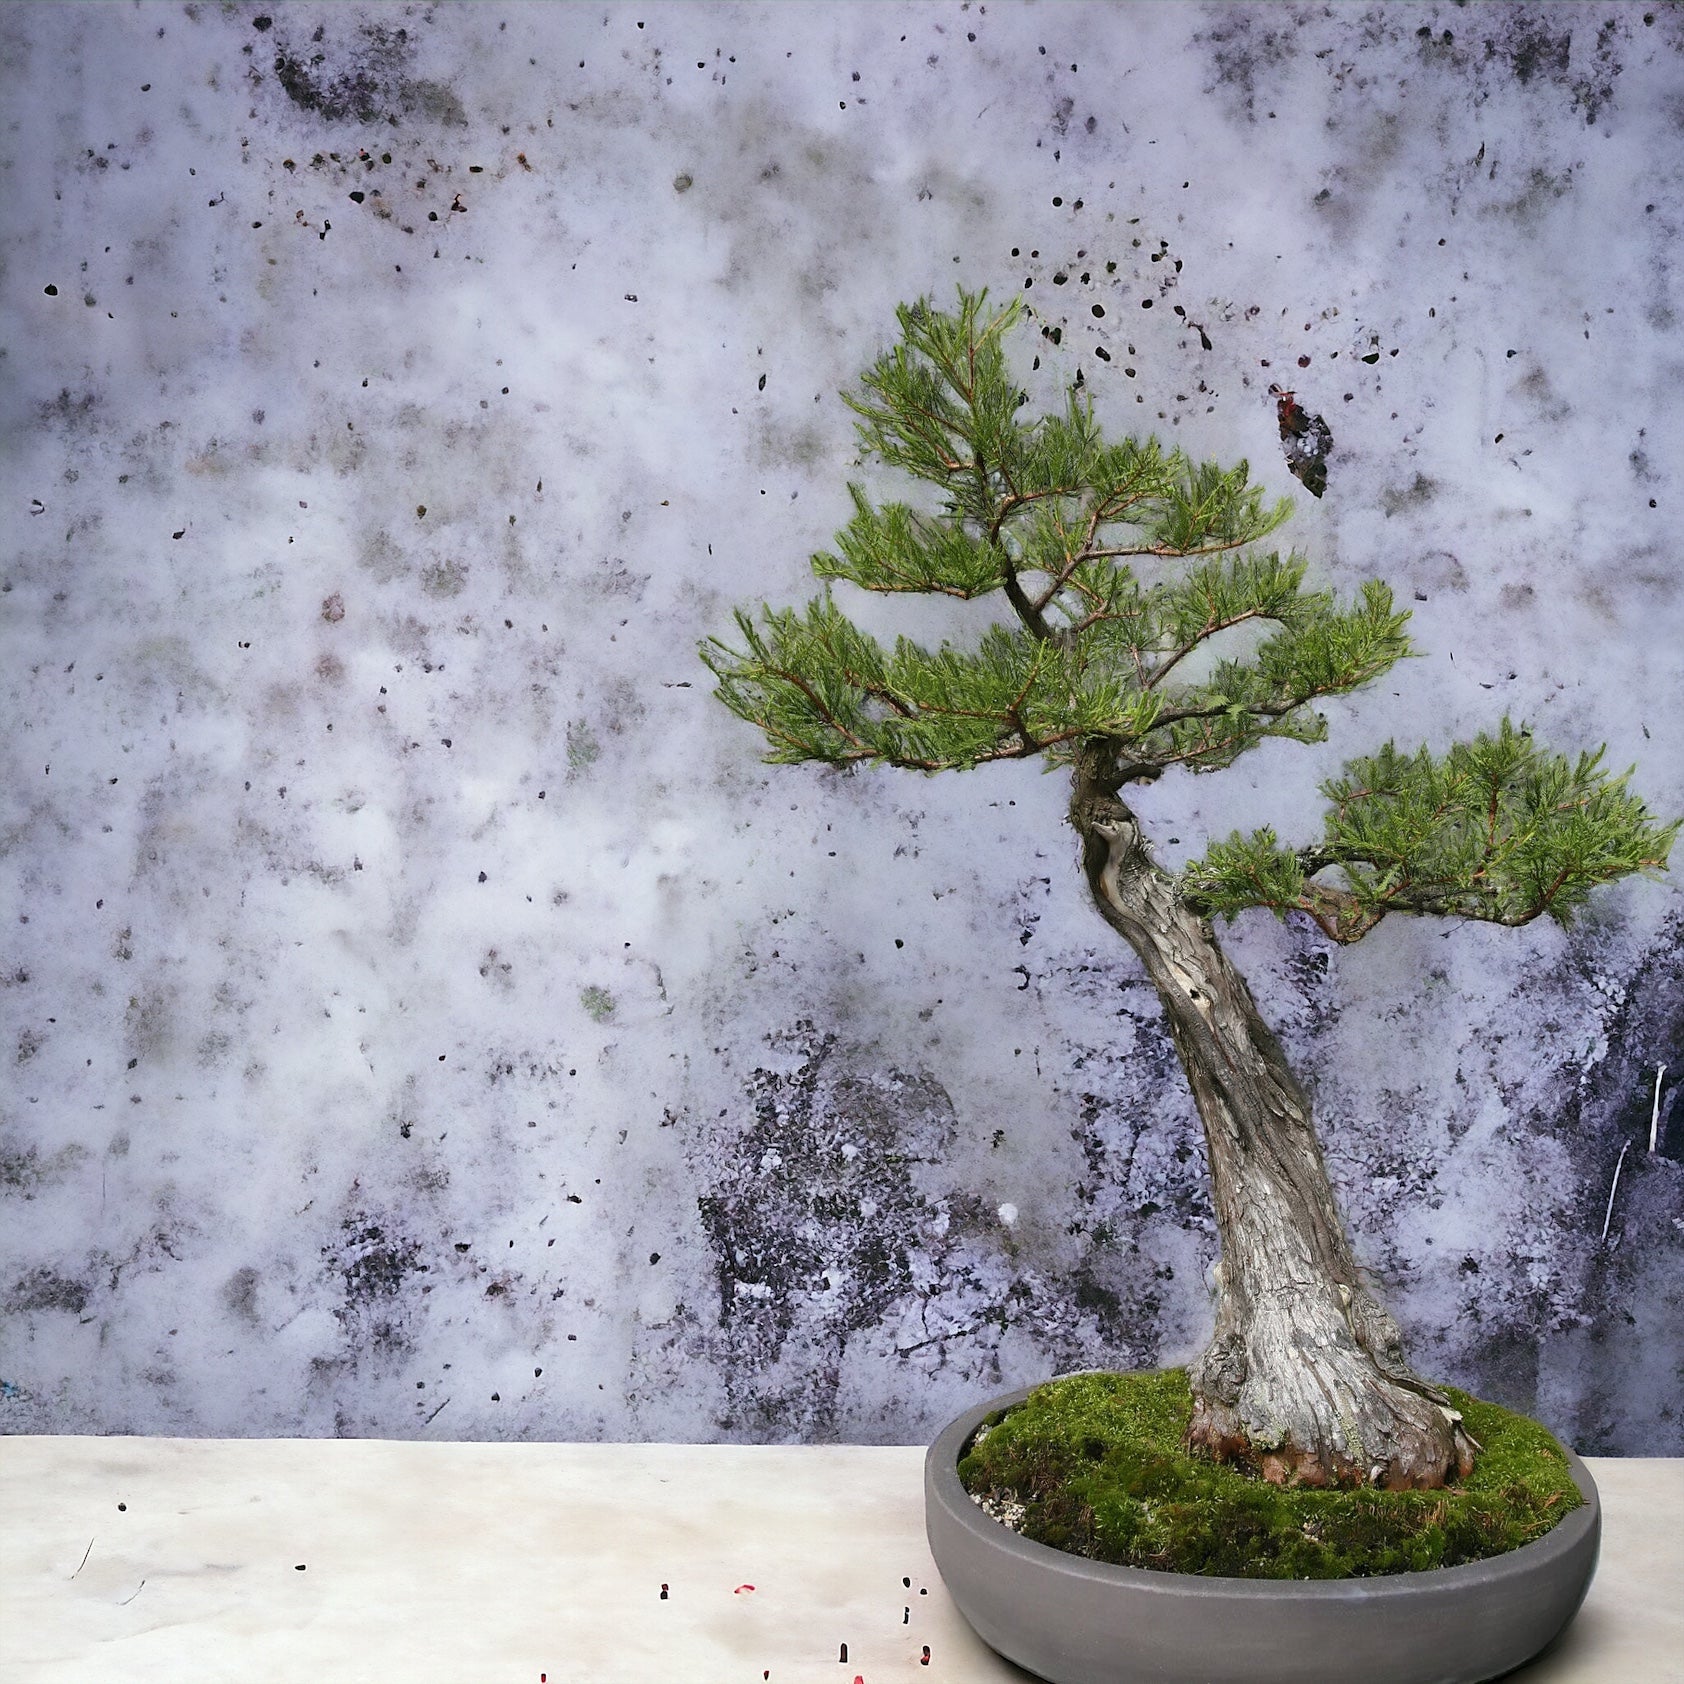 Bald Cypress Bonsai: Your Pocket-Sized Swamp Comes Home